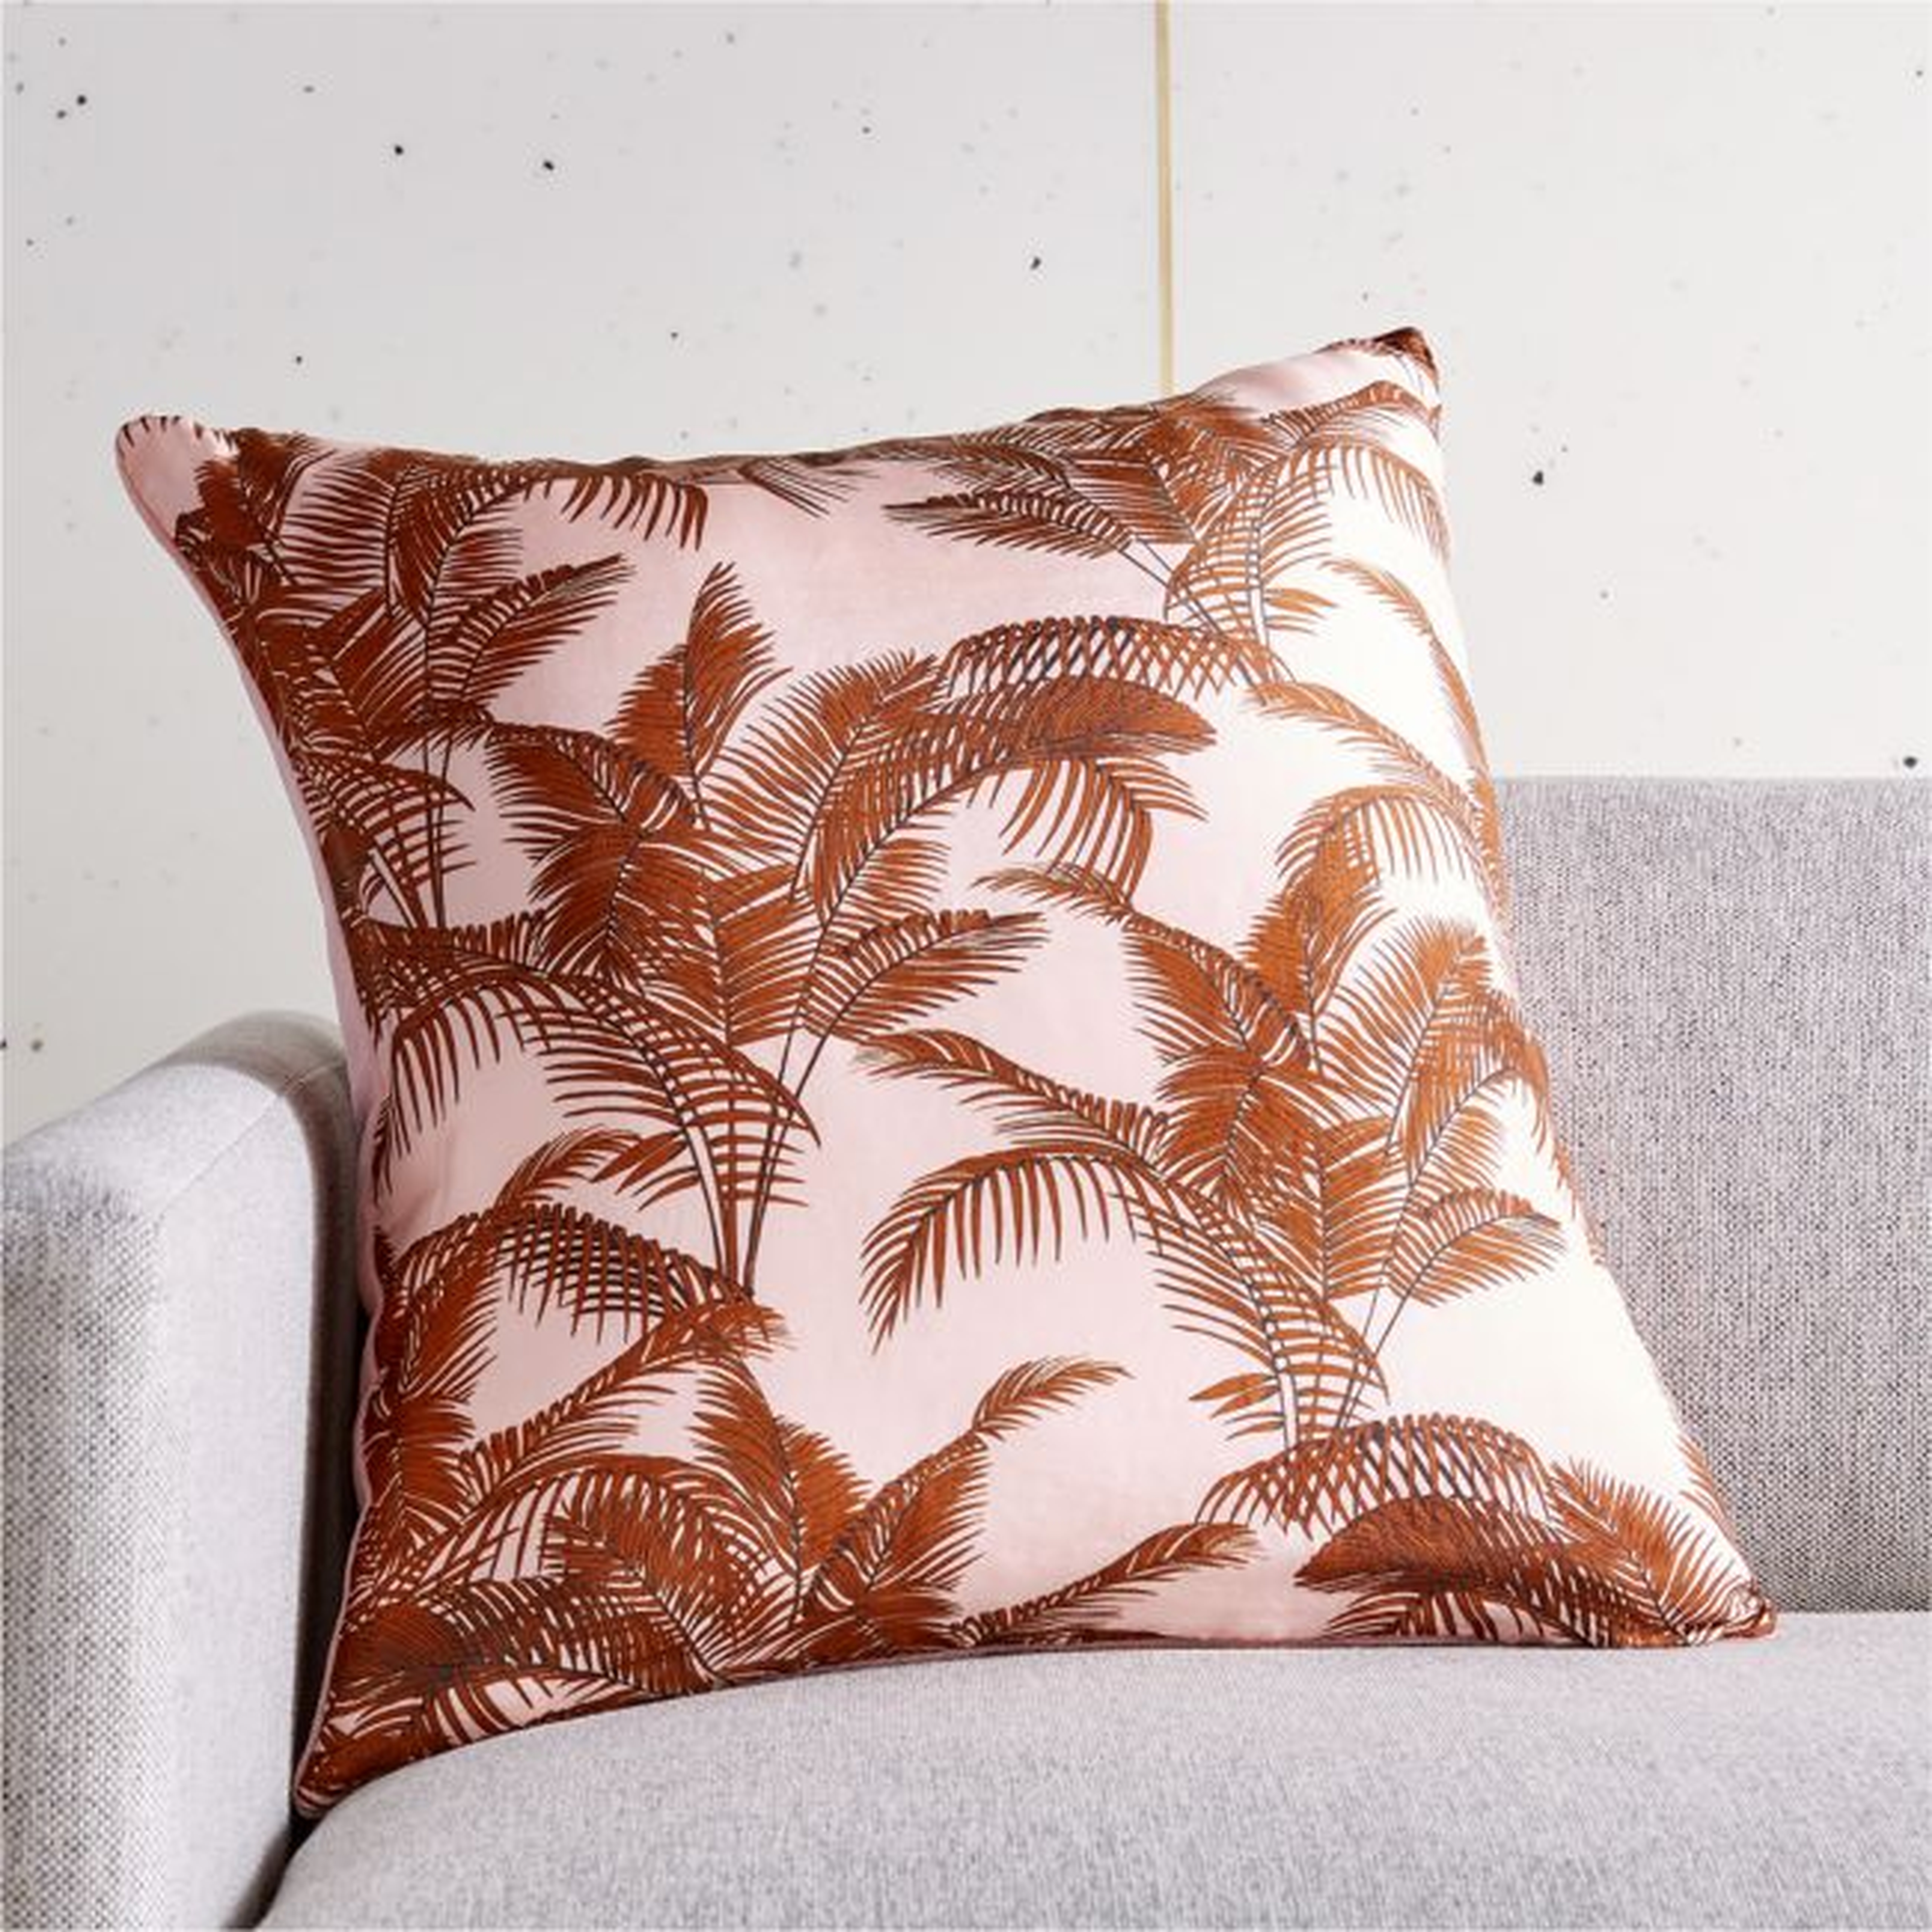 20" Cabanna Pillow with Feather-Down Insert - CB2